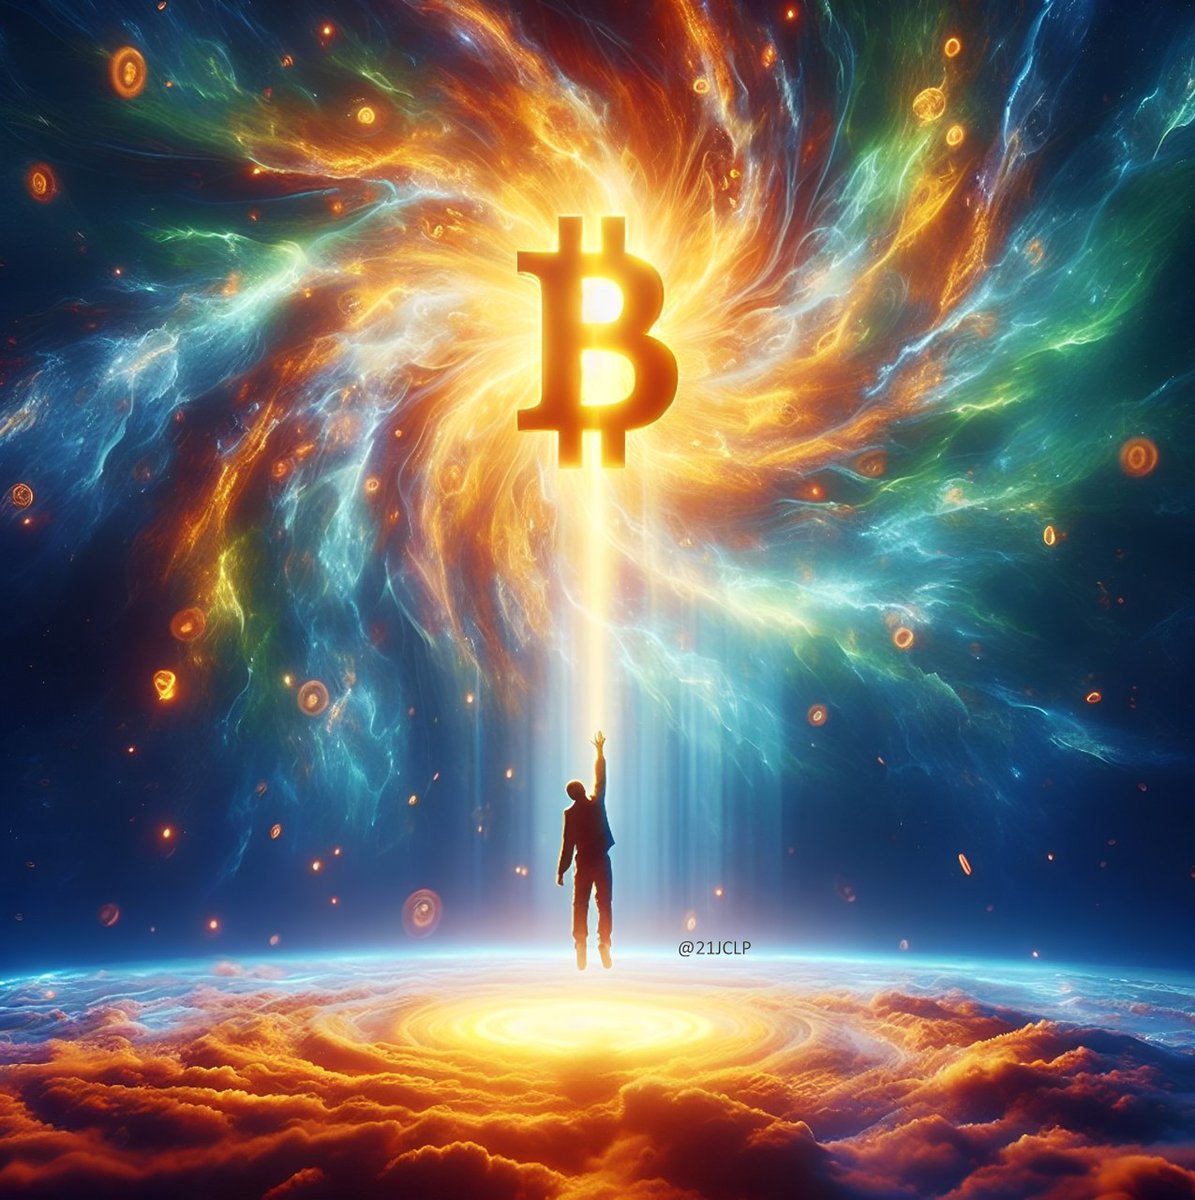 Once you cross the threshold into the #Bitcoin universe, there’s no way back ⚡